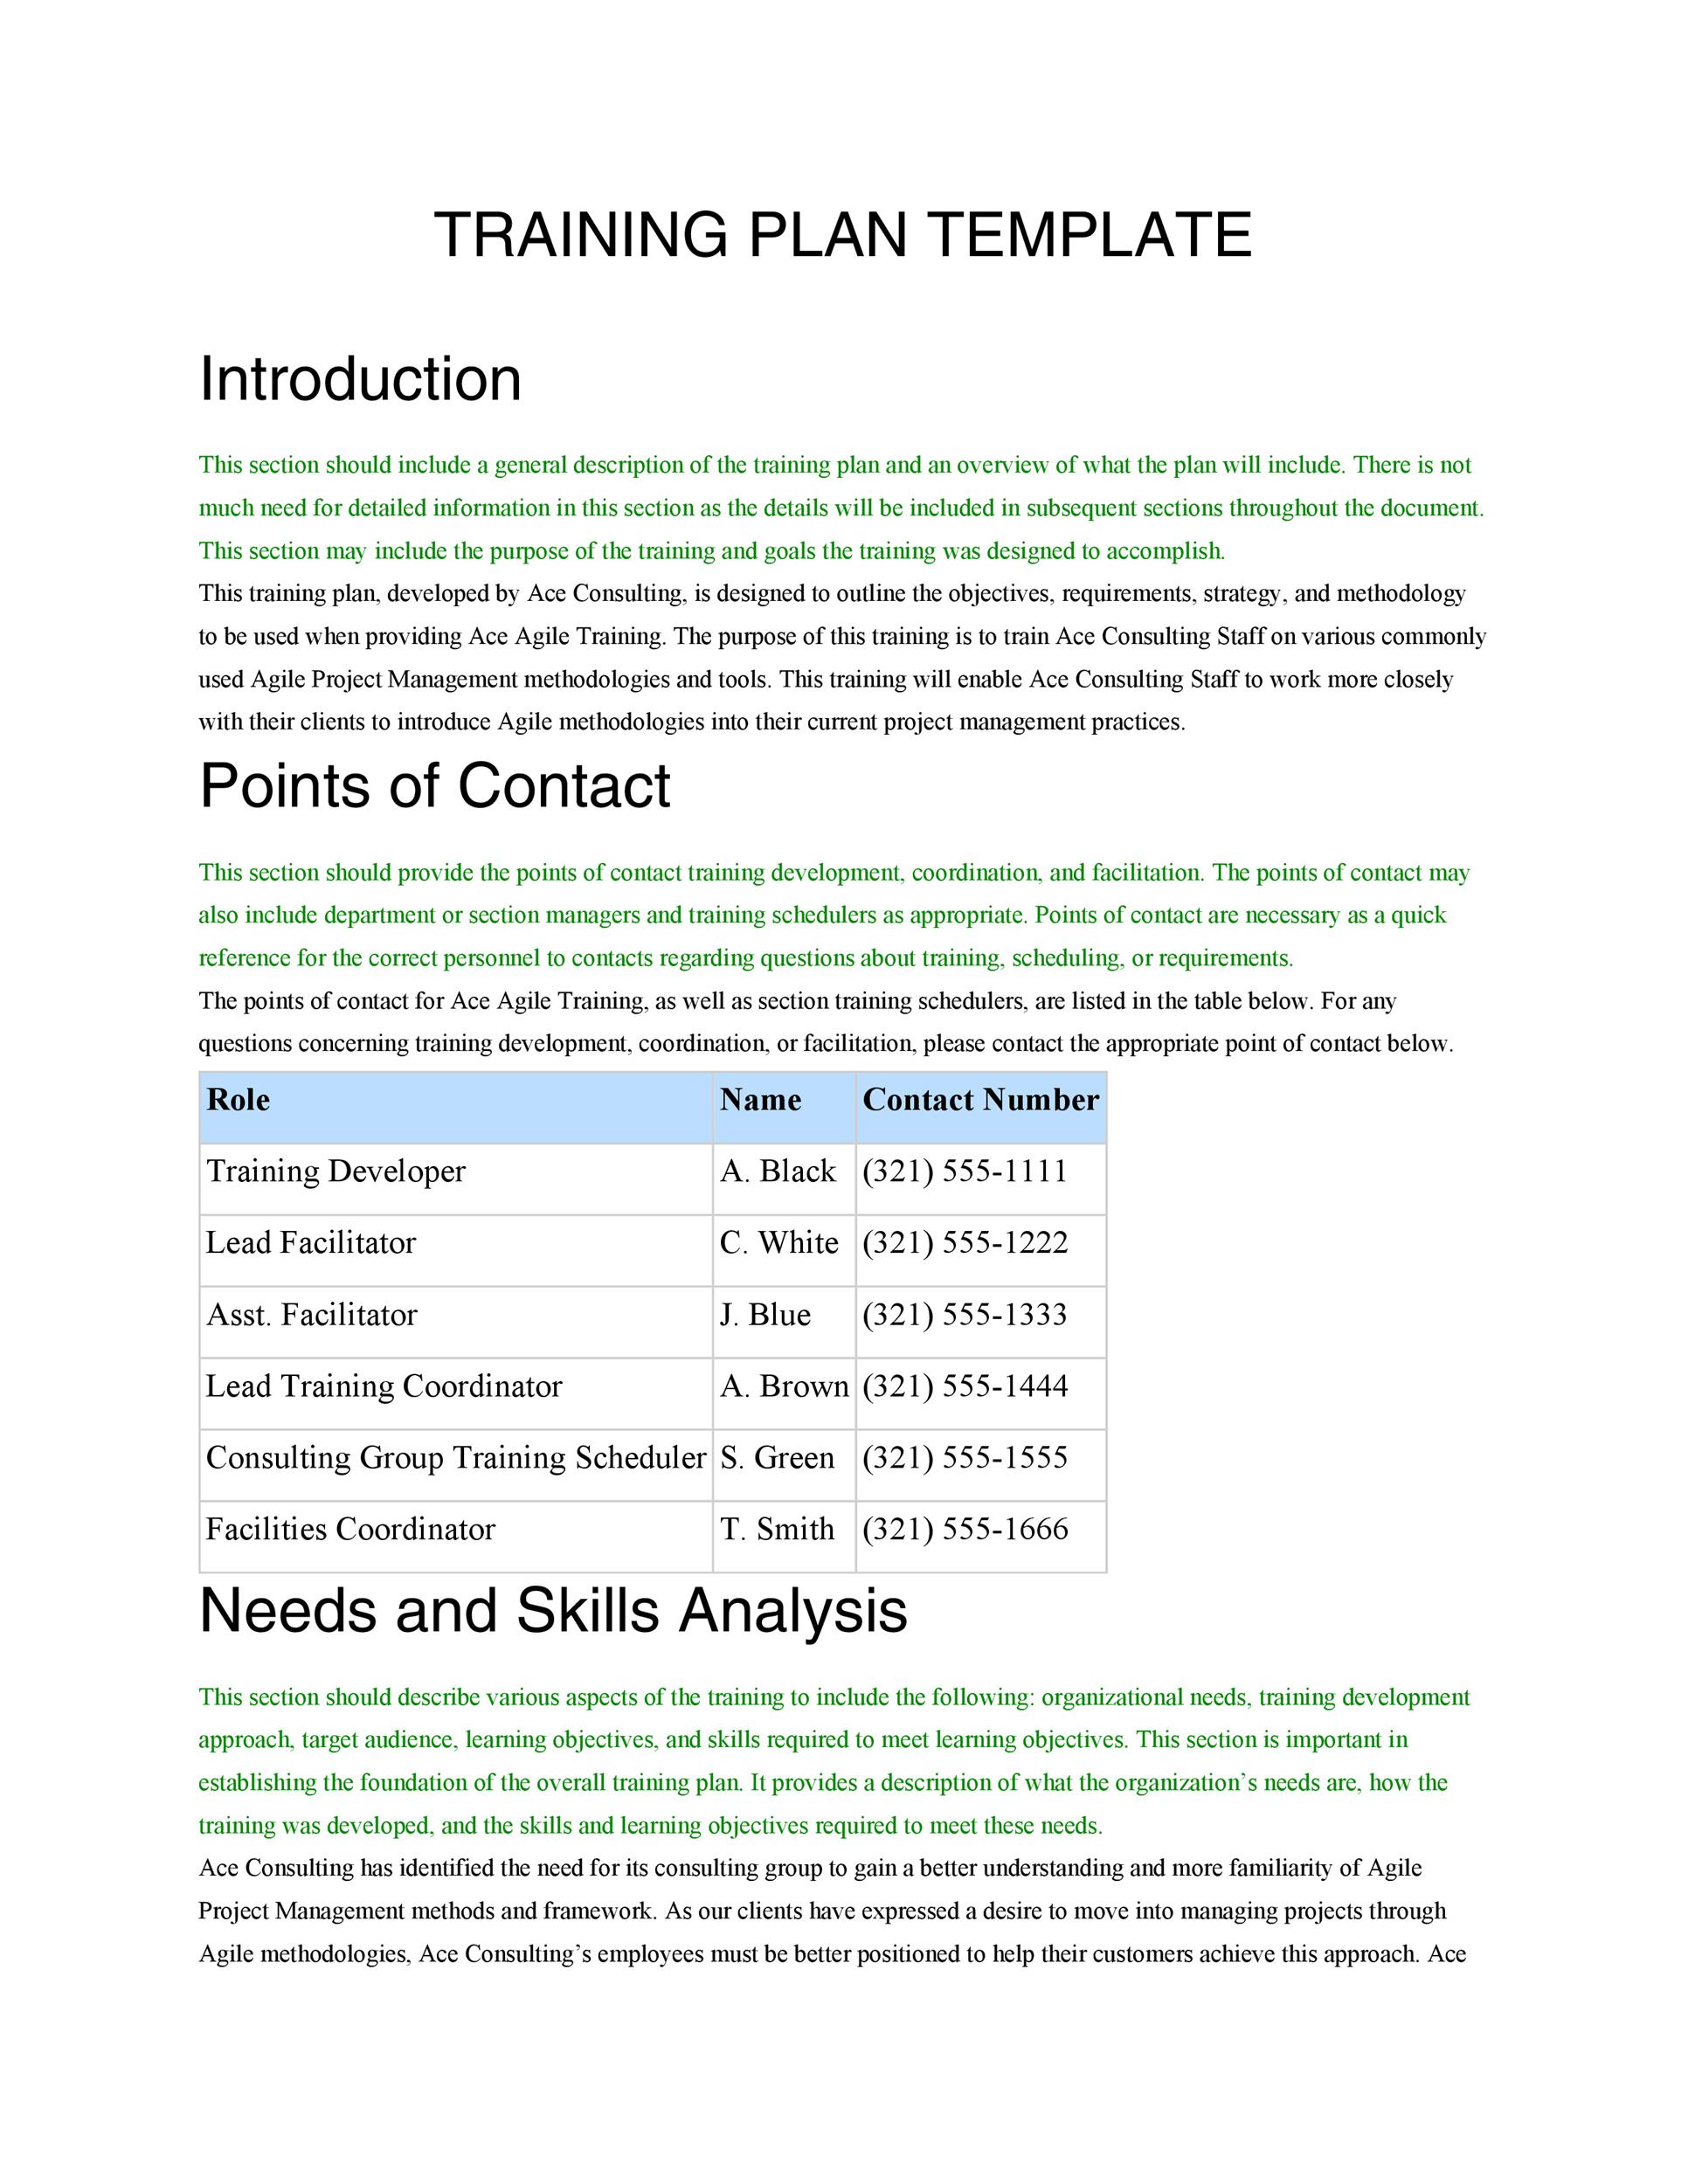 Training Manual 40  Free Templates Examples in MS Word